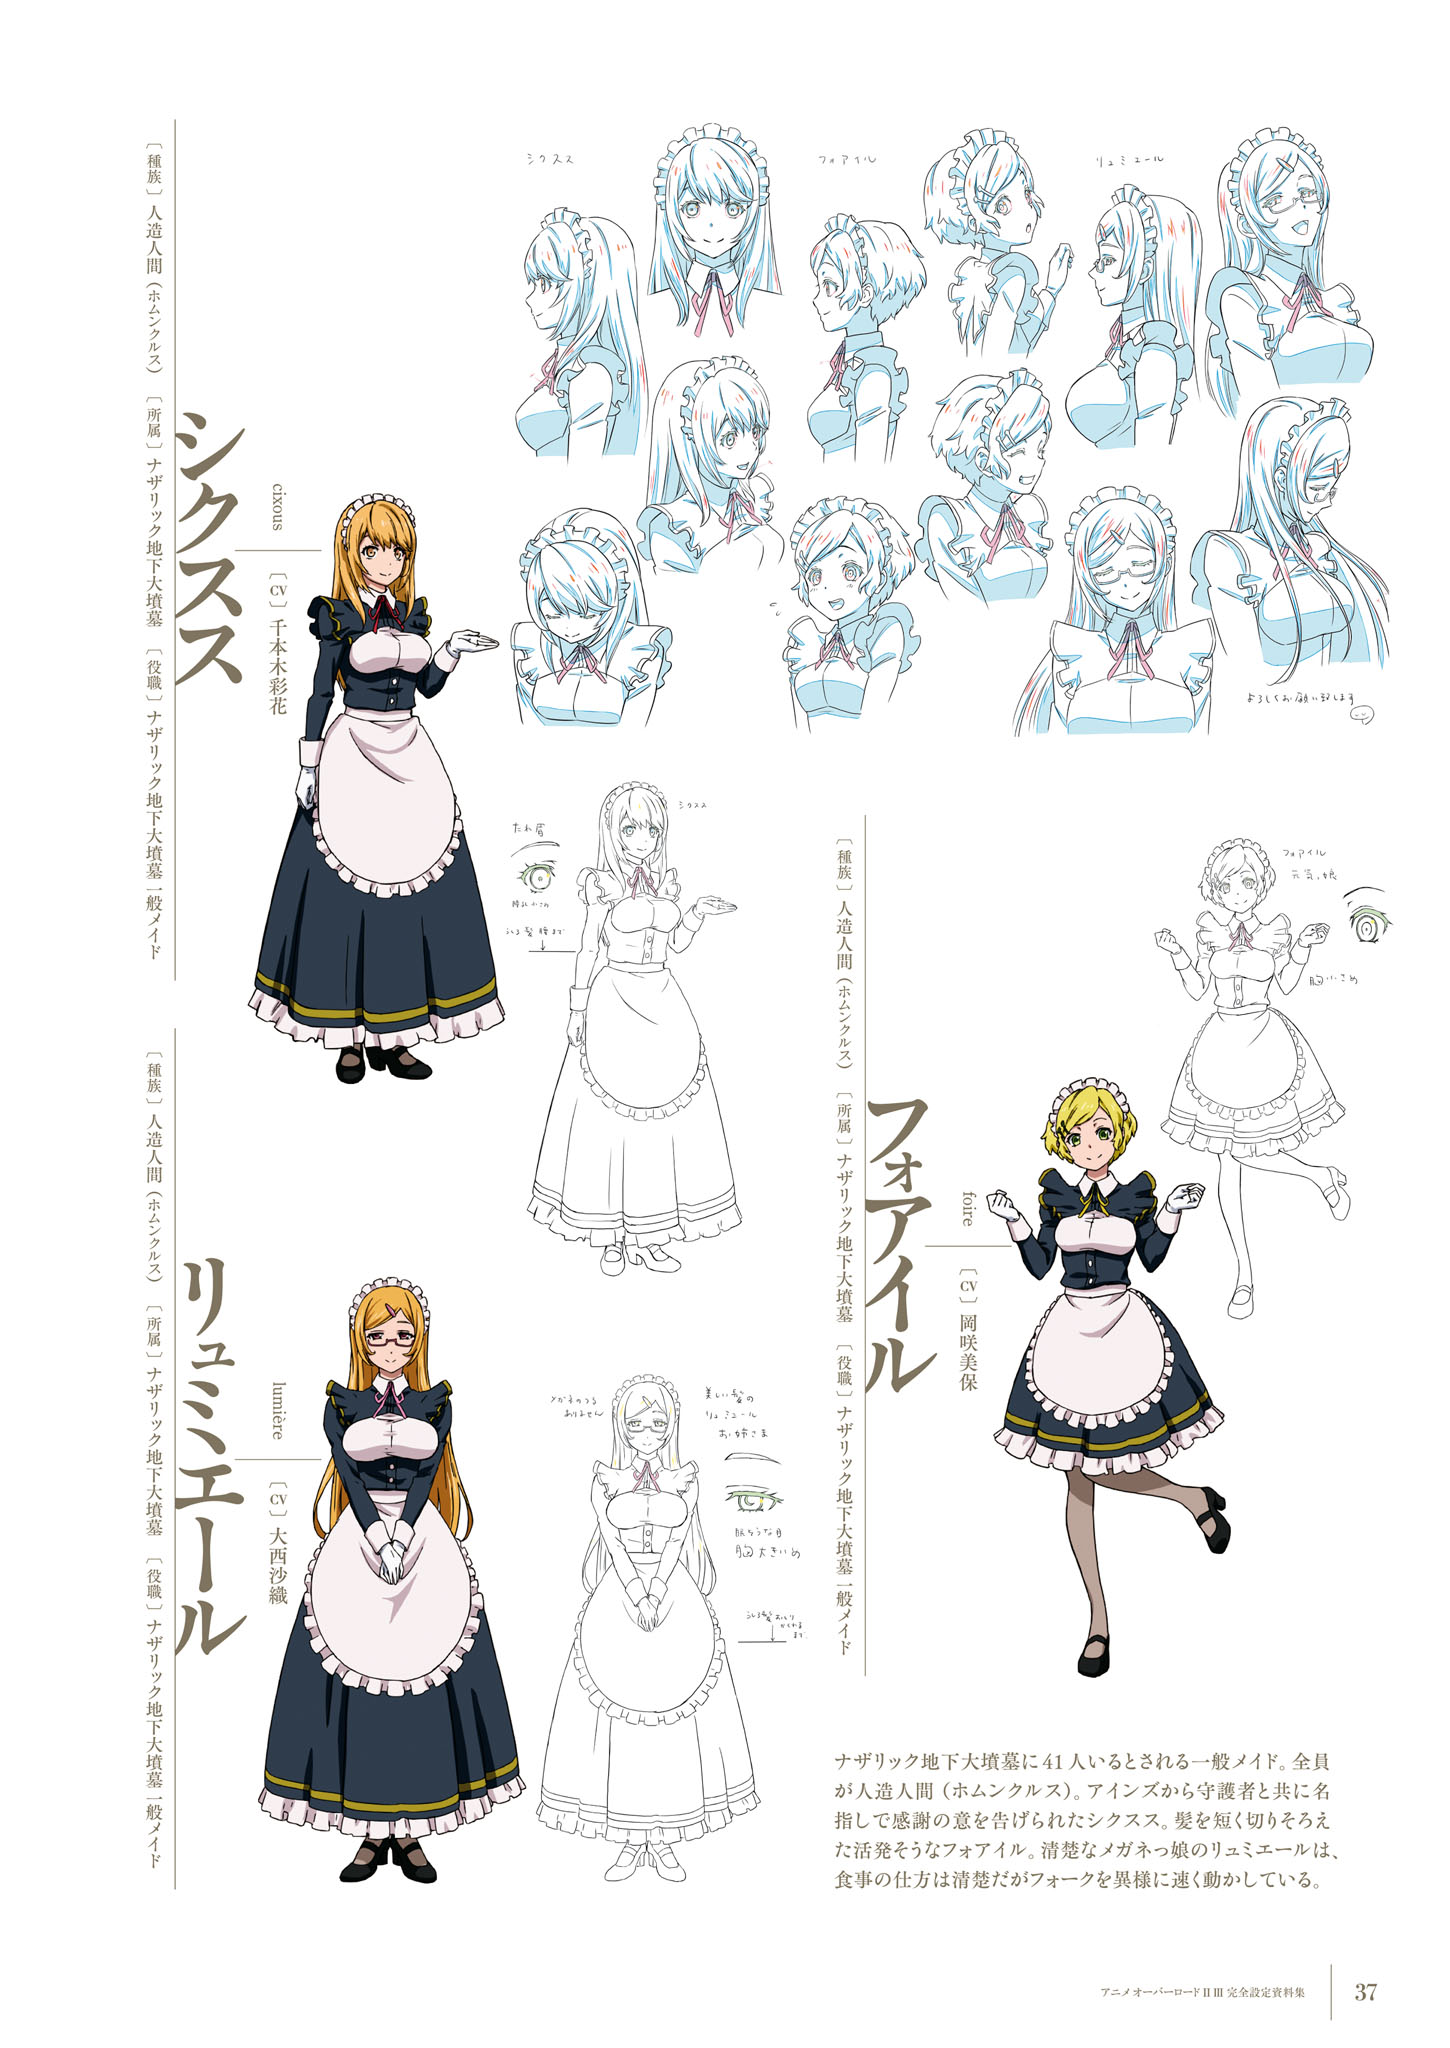 Overlord Cixious Foire Lumiere Overlord Maid Sketch Yande Re